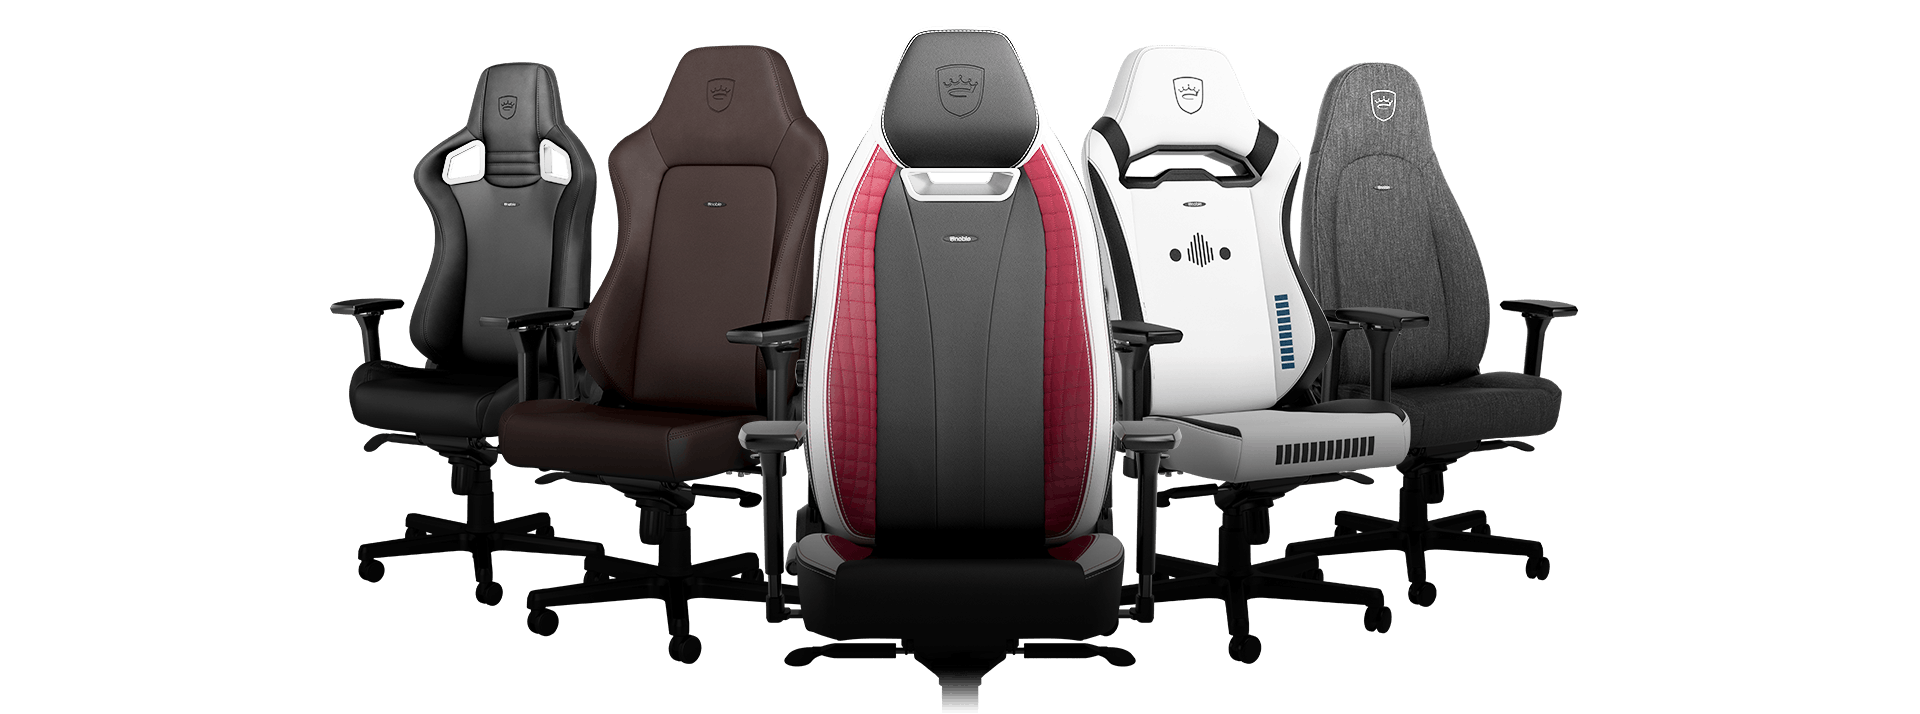 noblechairs Gaming Chairs Product Portfolio